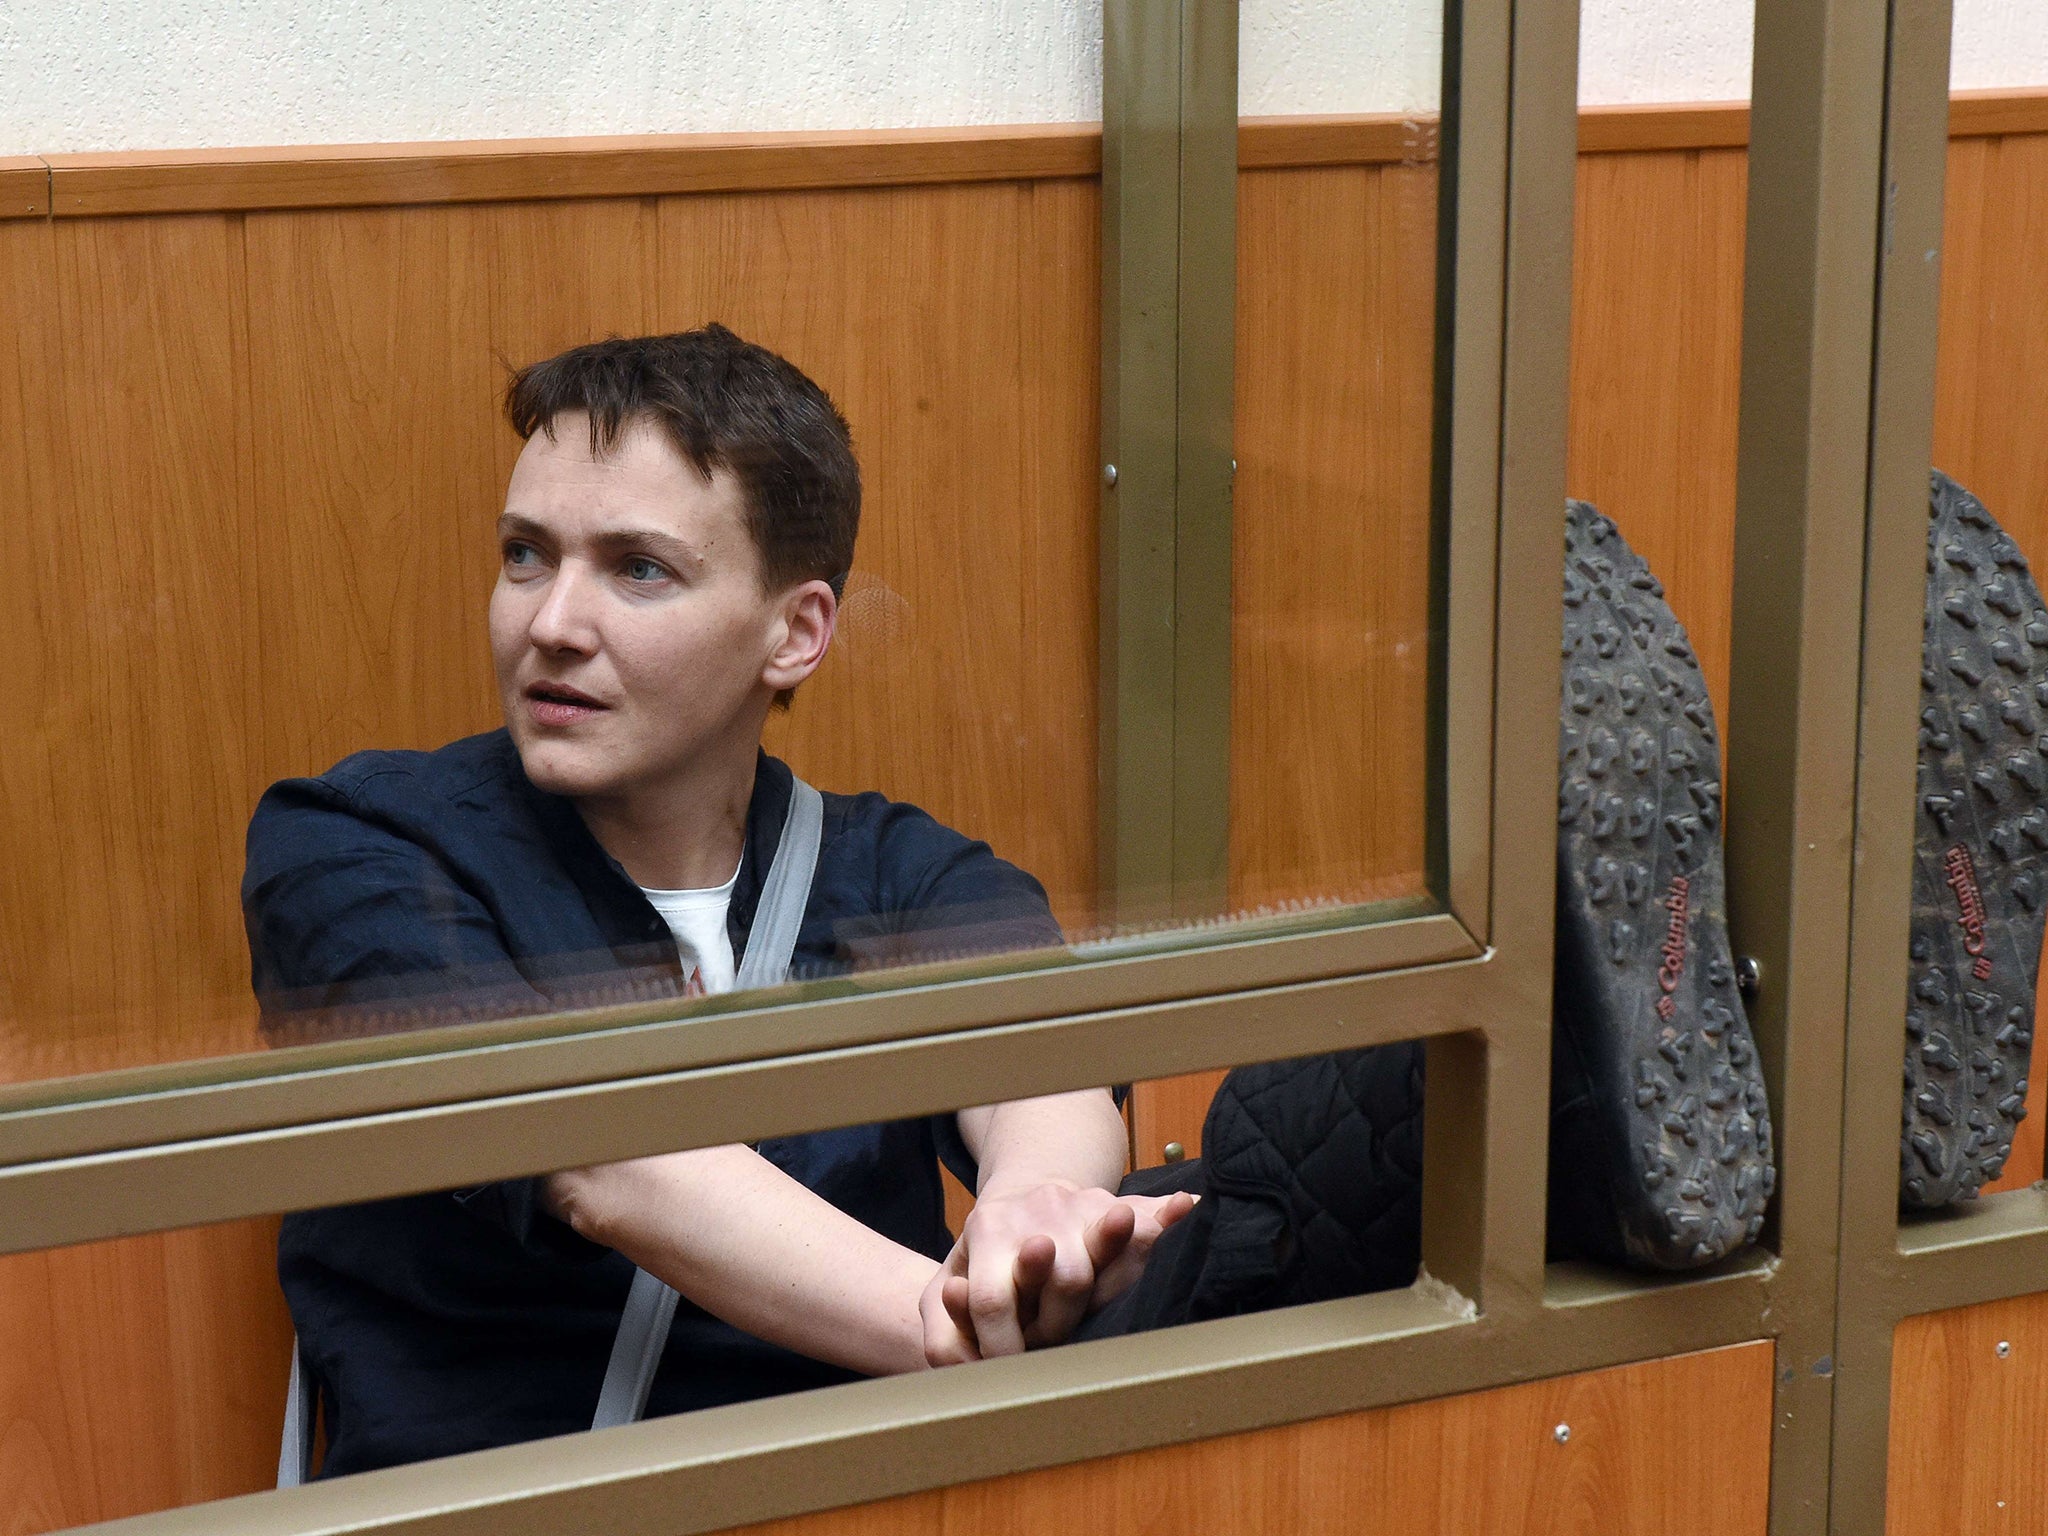 Ukrainian Pilot Sentenced To 22 Years In Prison By Russian Court The